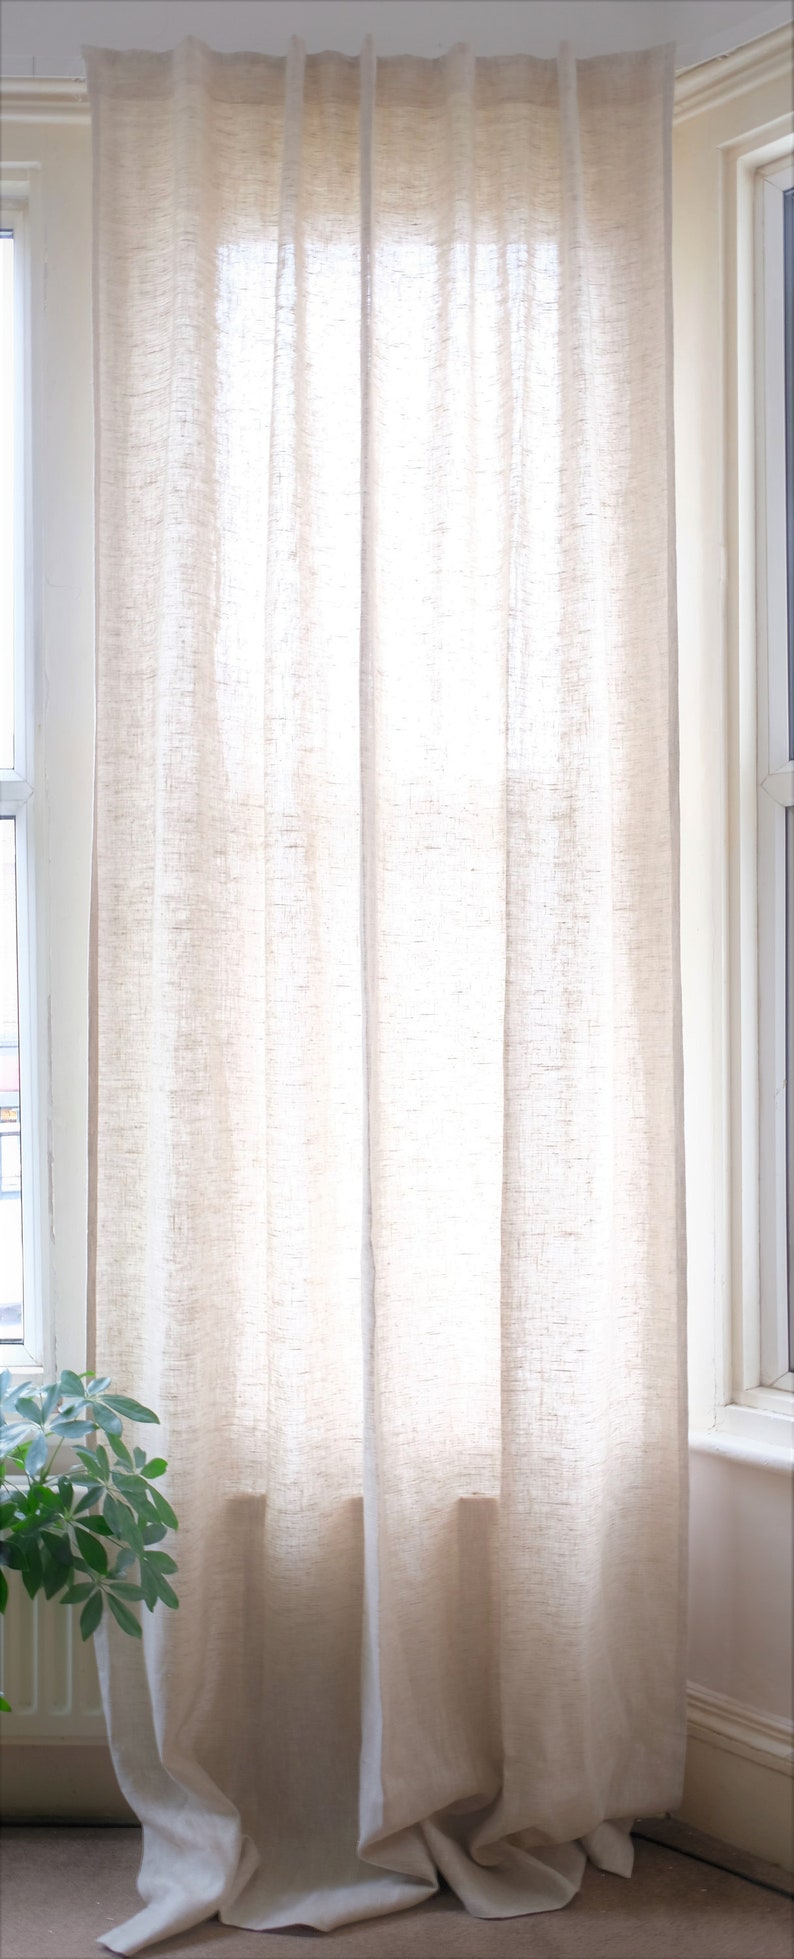 100% Natural Linen Window Curtains Drapes Voile Panels for | Etsy